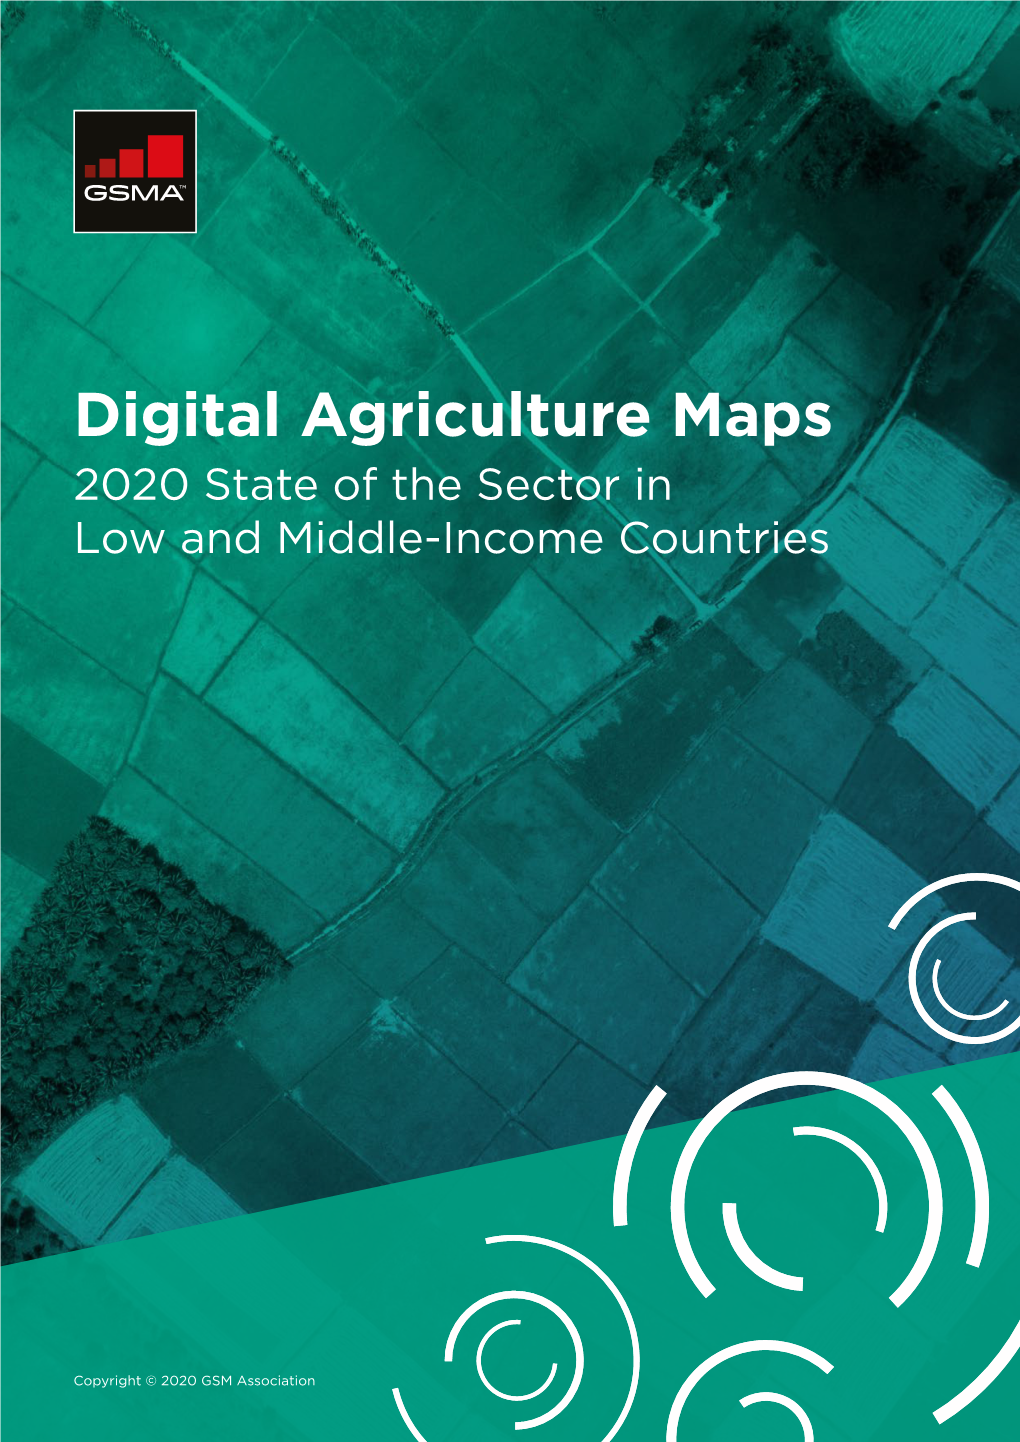 Digital Agriculture Maps 2020 State of the Sector in Low and Middle-Income Countries